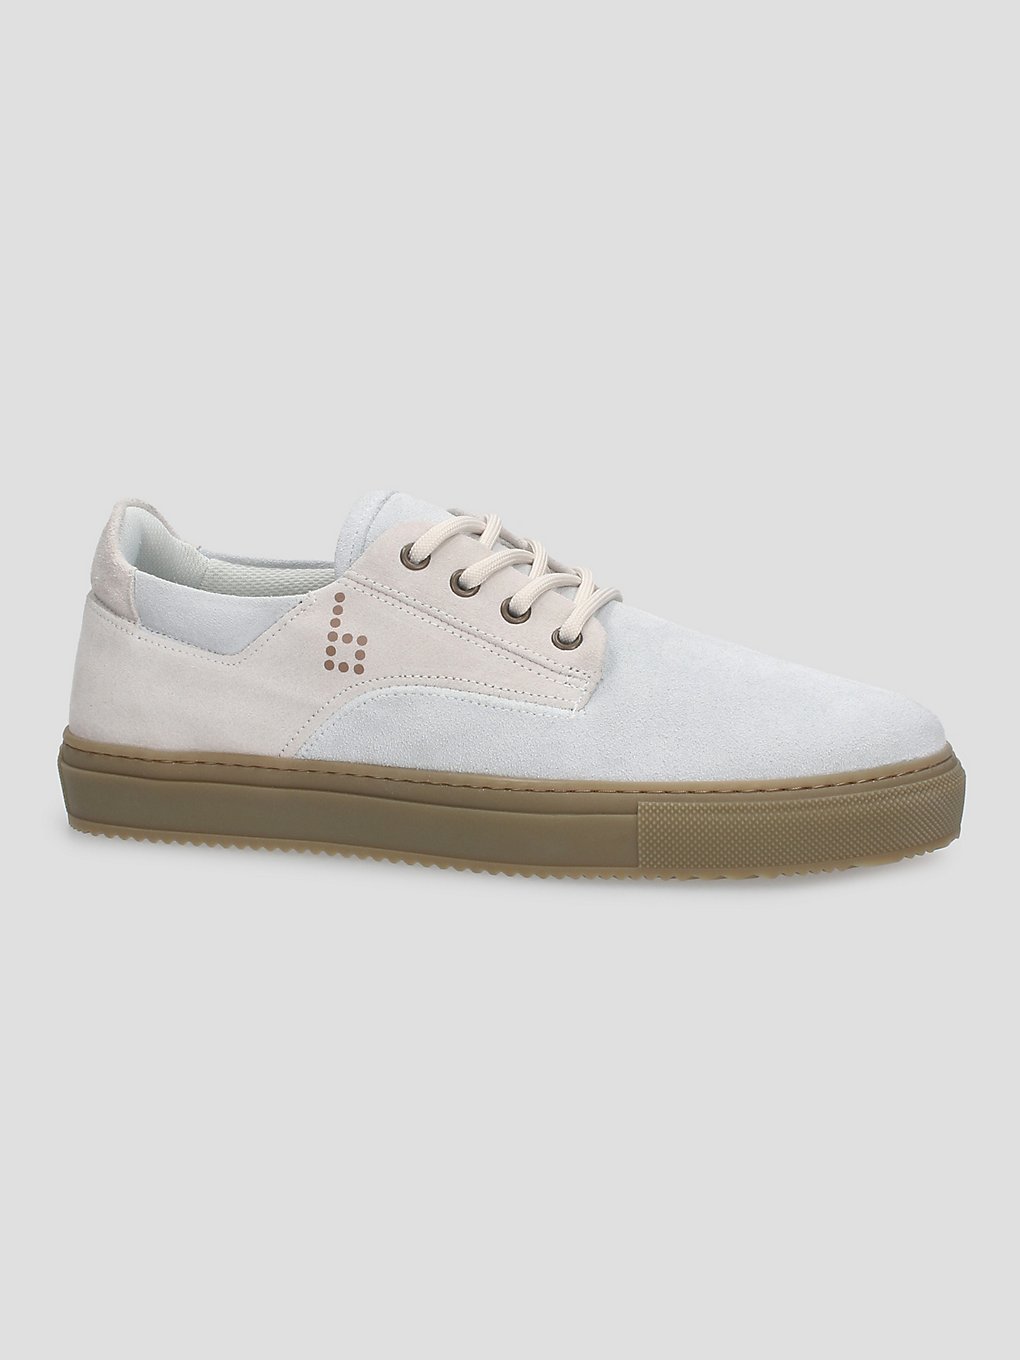 Braille Skateboarding First Try Skate Shoes off white kaufen